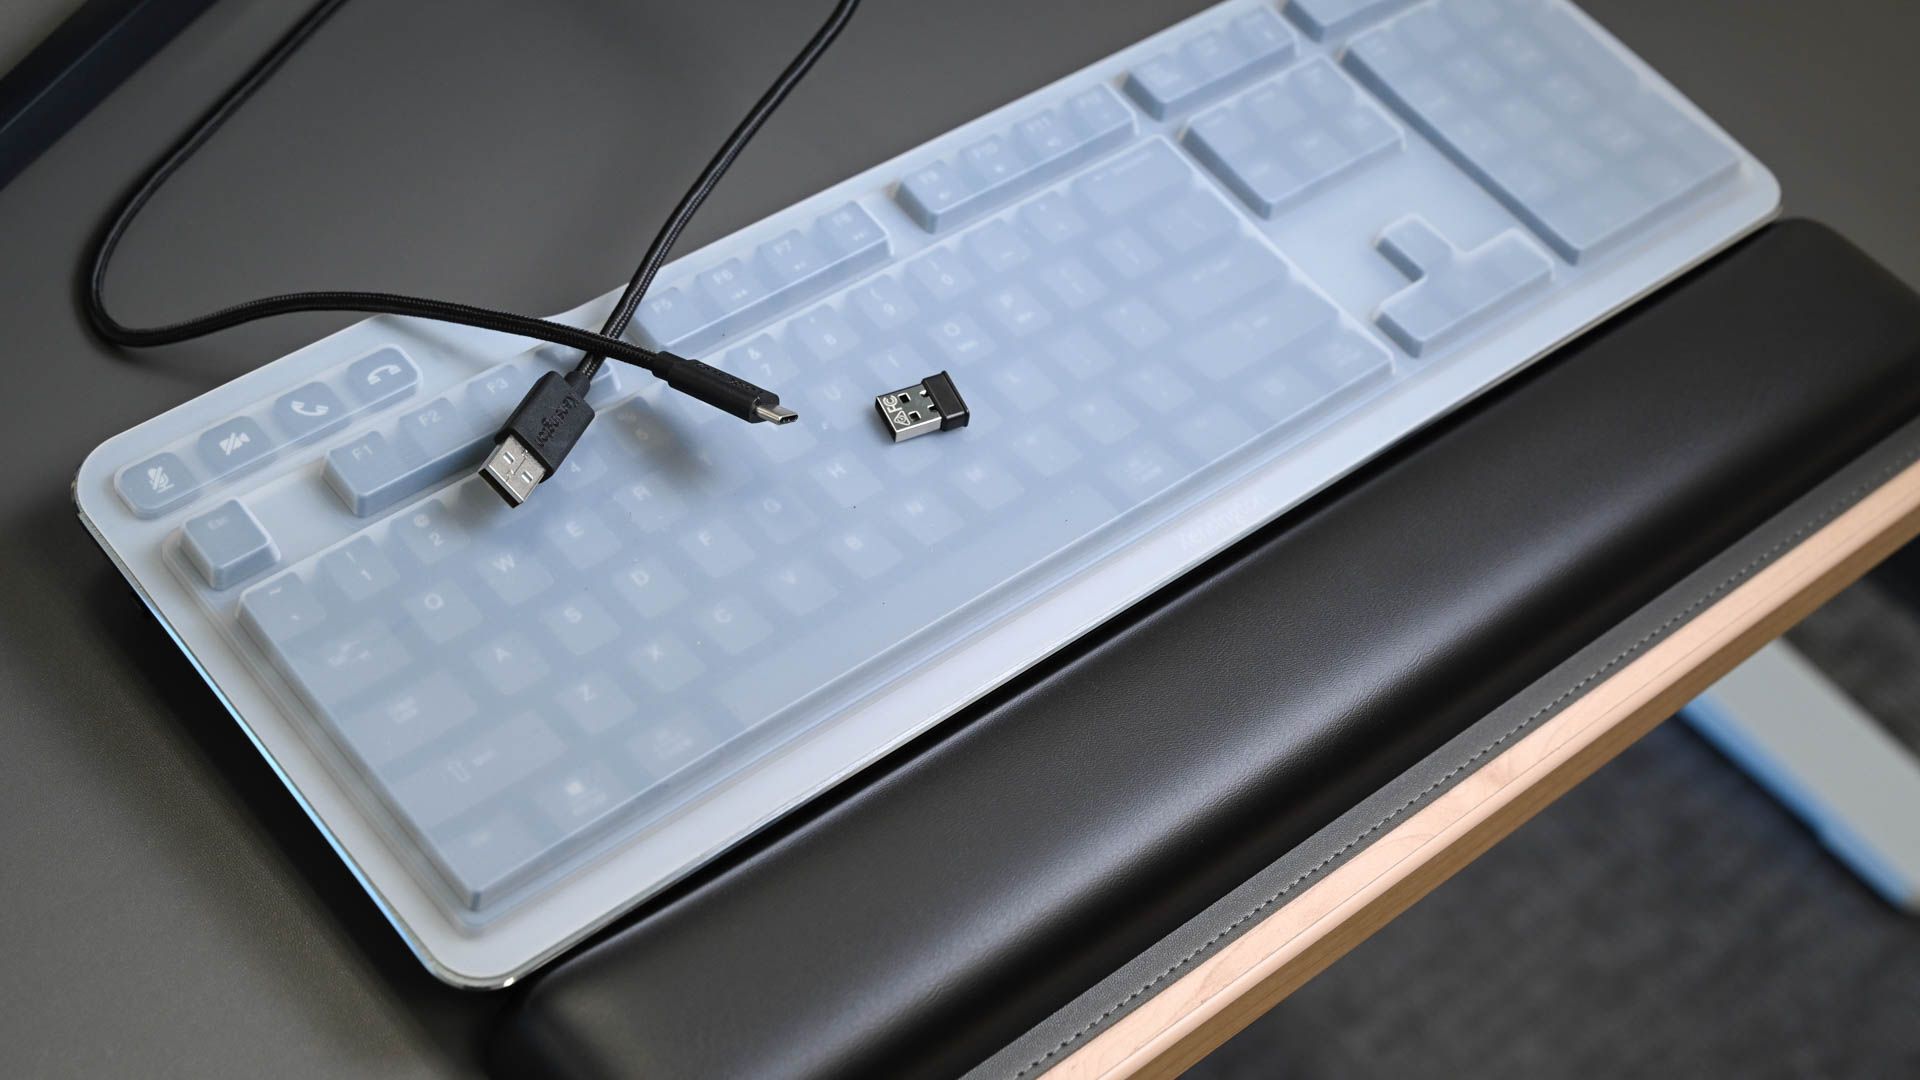 Kensington QuietType Pro keyboard on a desk with USB cable, dongle, and cover